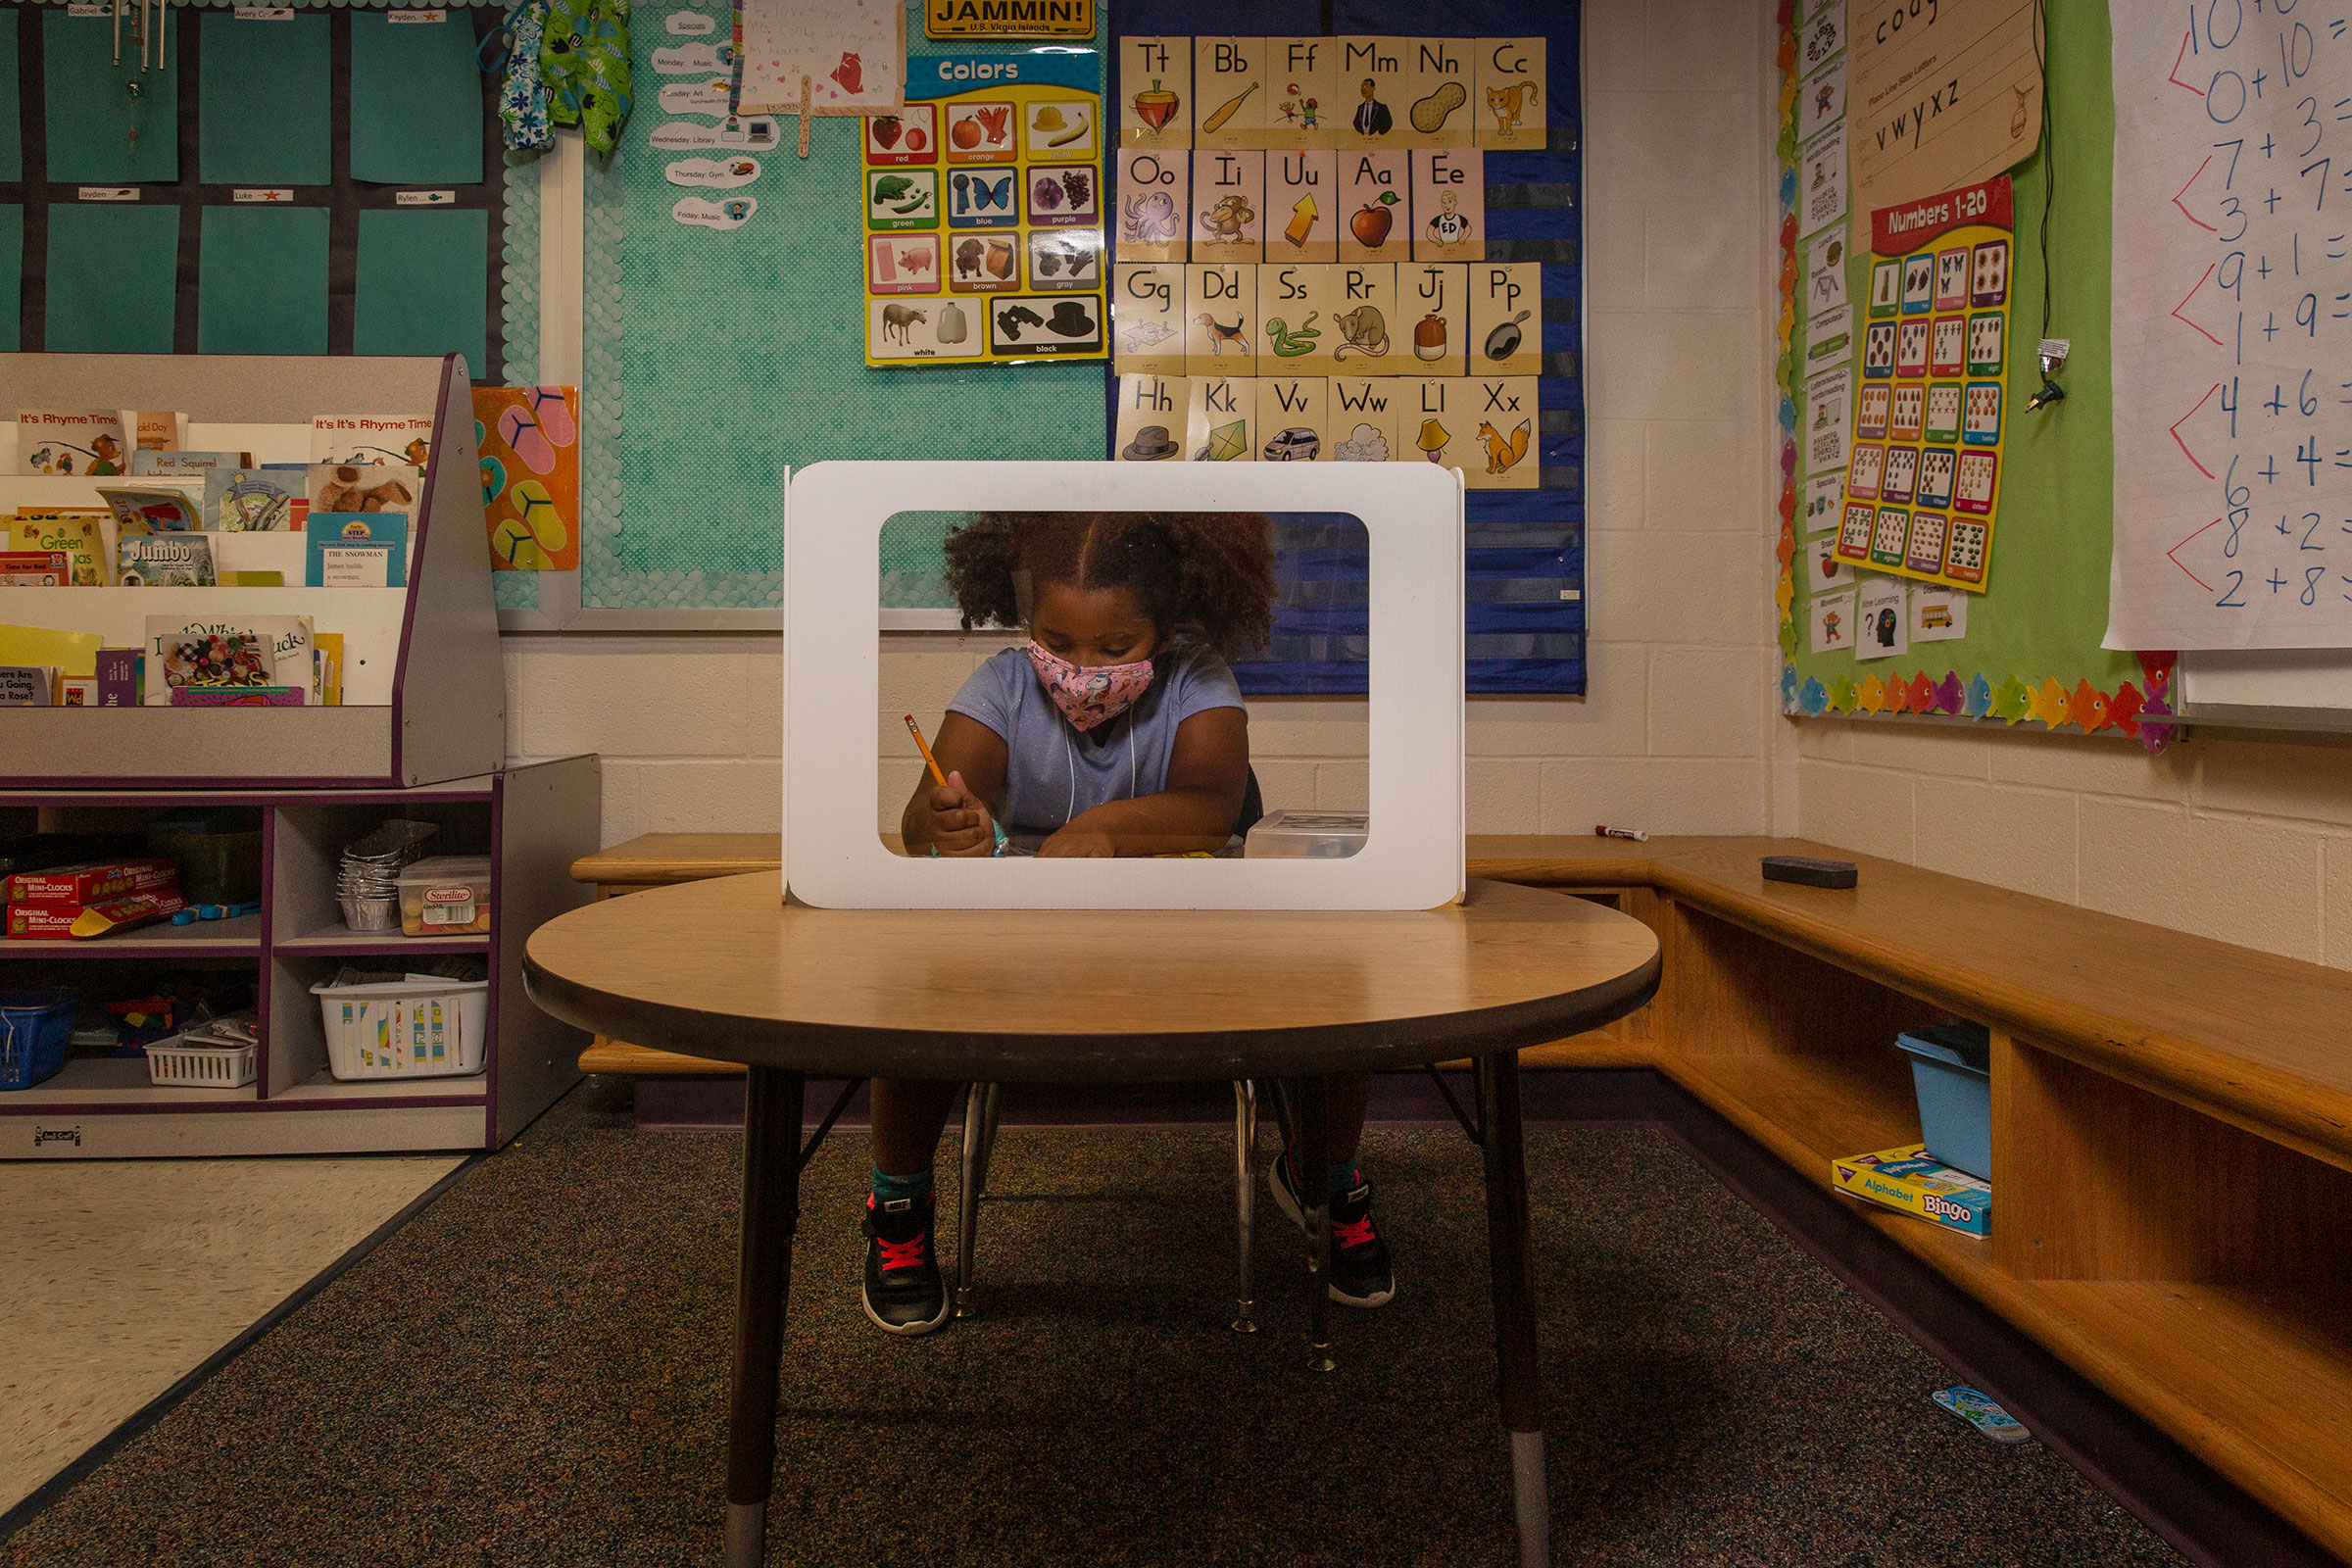 Plastic shields surround the desk where 6-year-old Aven Mullins works (Gillian Laub for TIME)